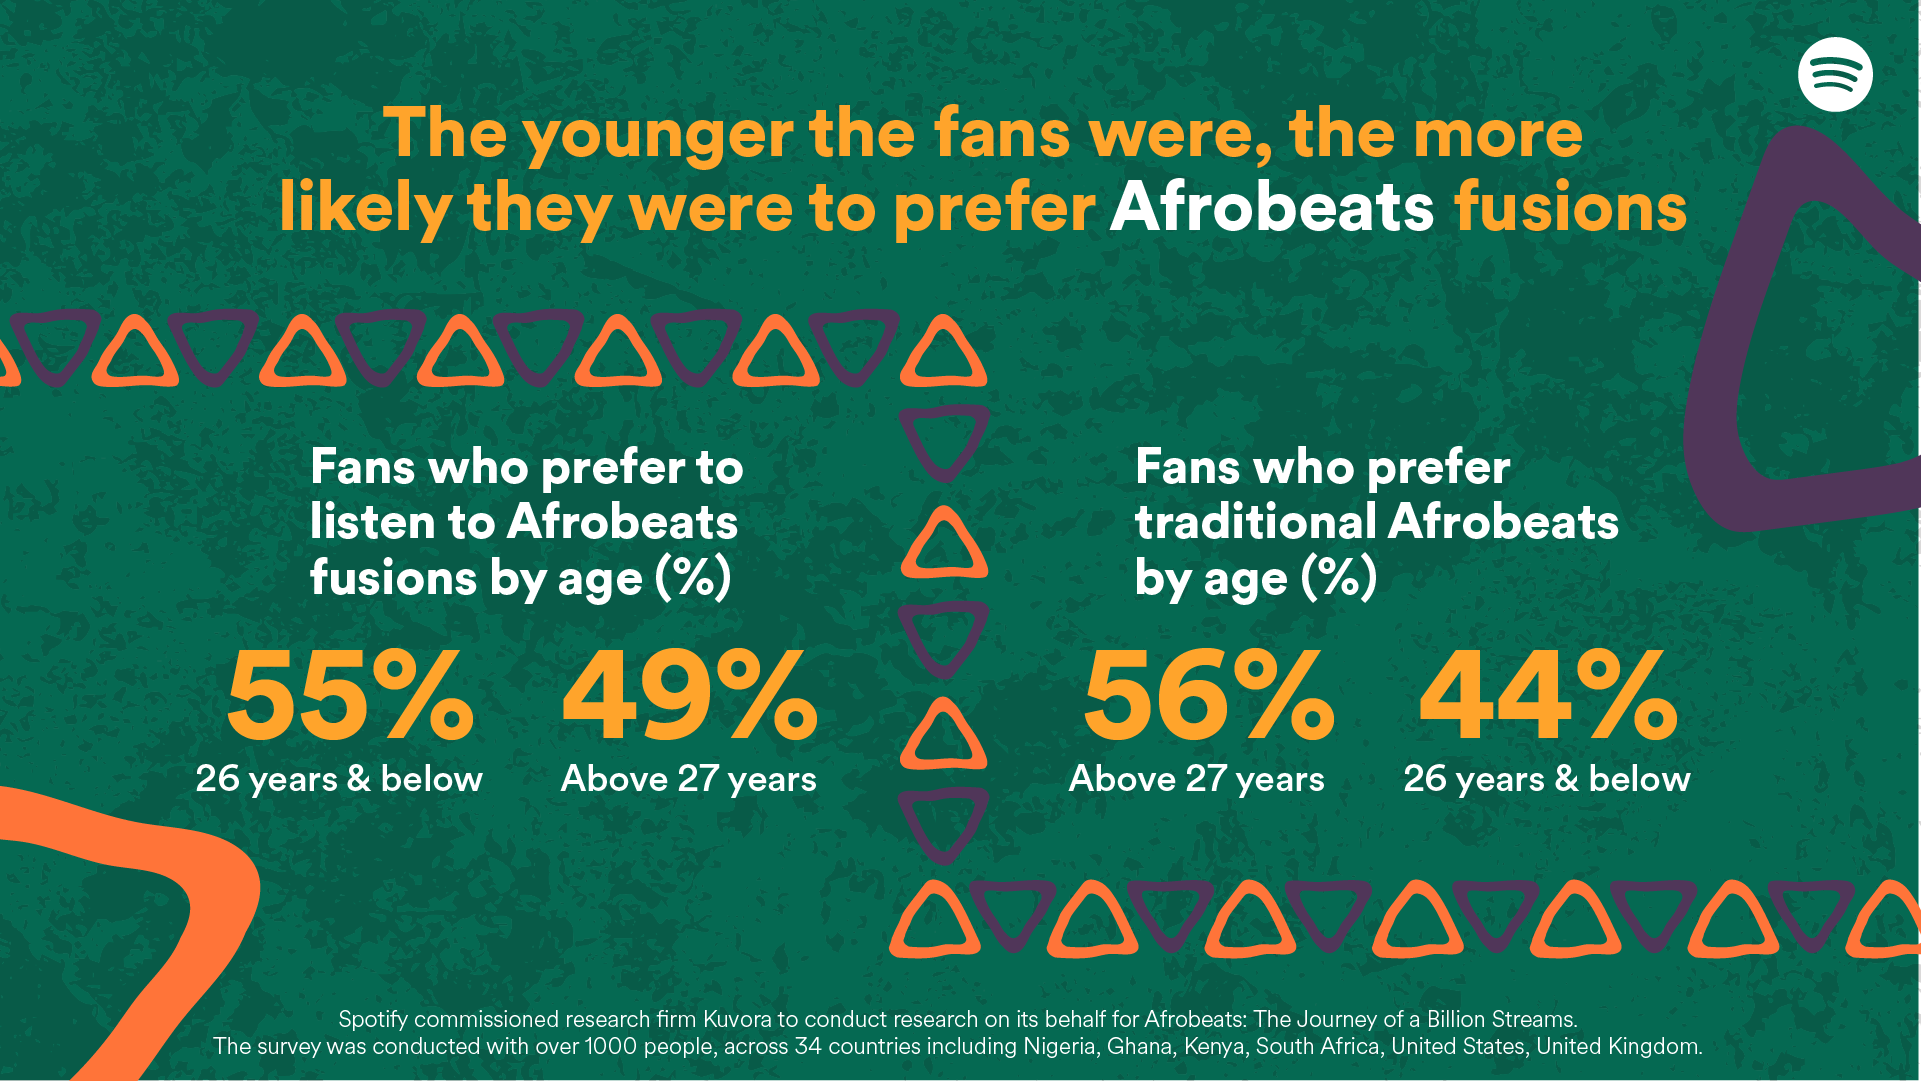 Spotify’s Afrobeats site: 90% of fans agree that fusing Afrobeats with other sounds has been helpful to its growth